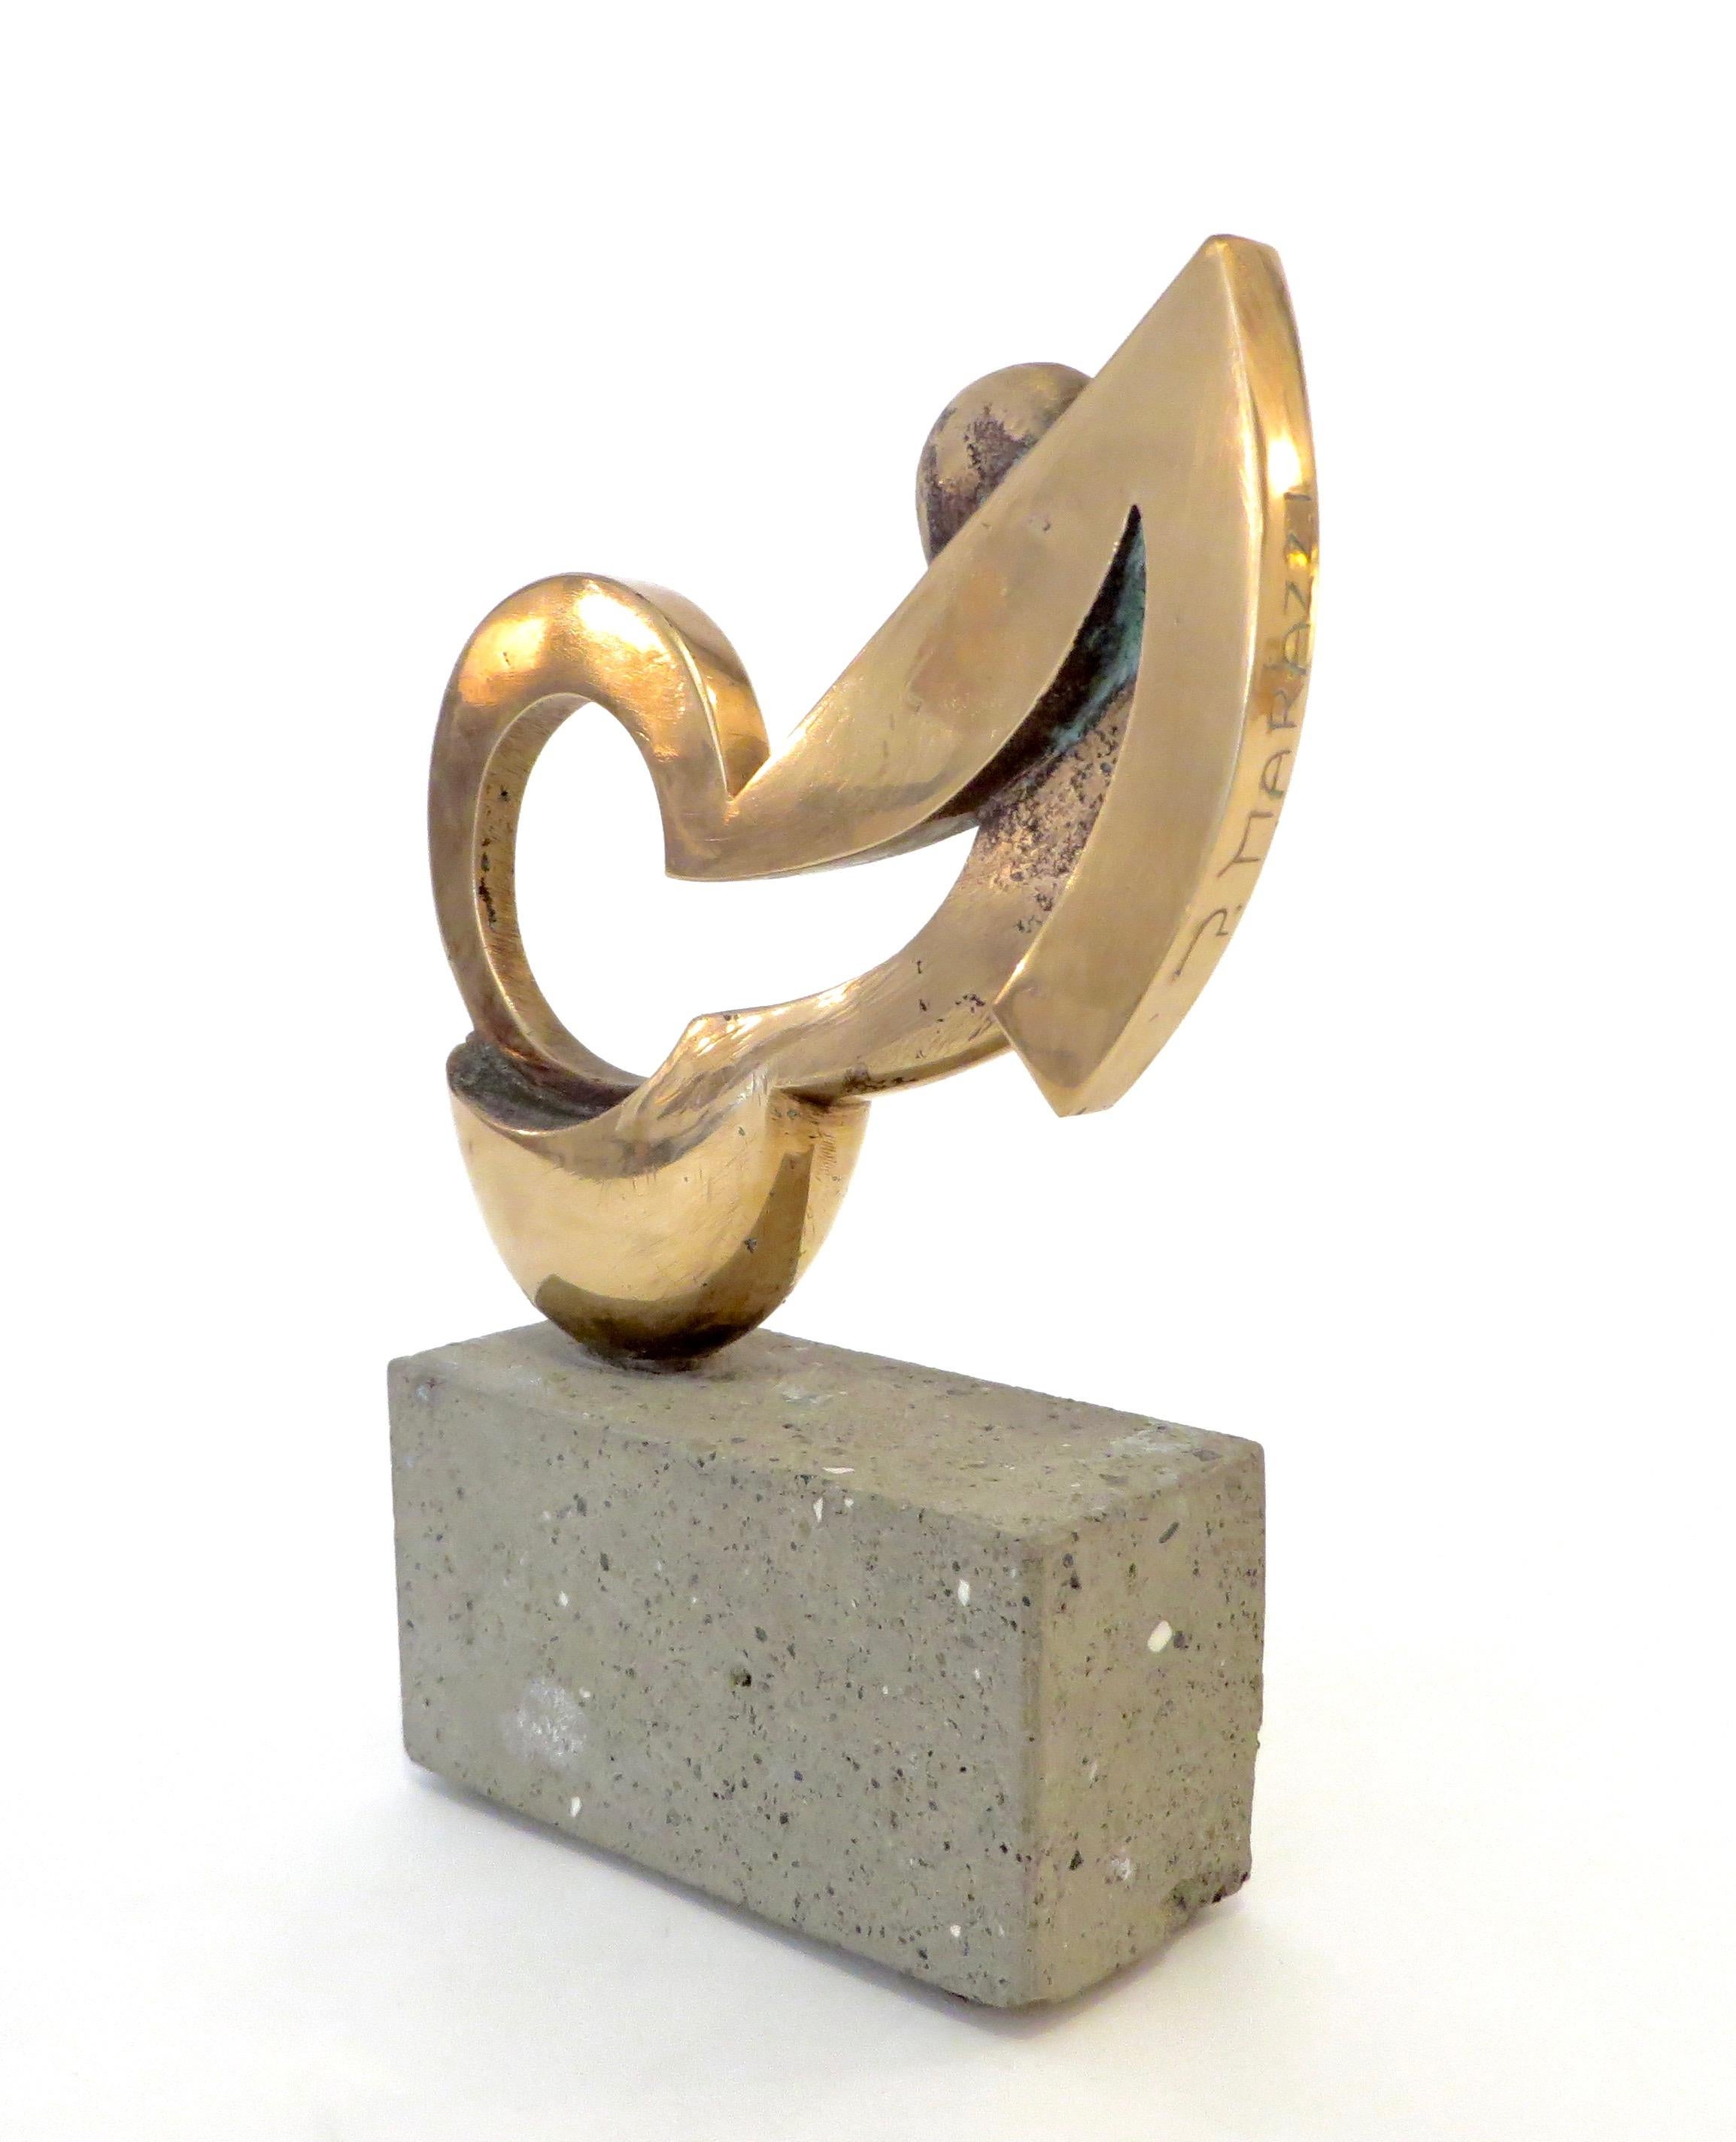 Italian artist Paolo Marazzi signed small bronze abstract sculpture on stone pedestal titled Unione Spaziale.
Overall size 5